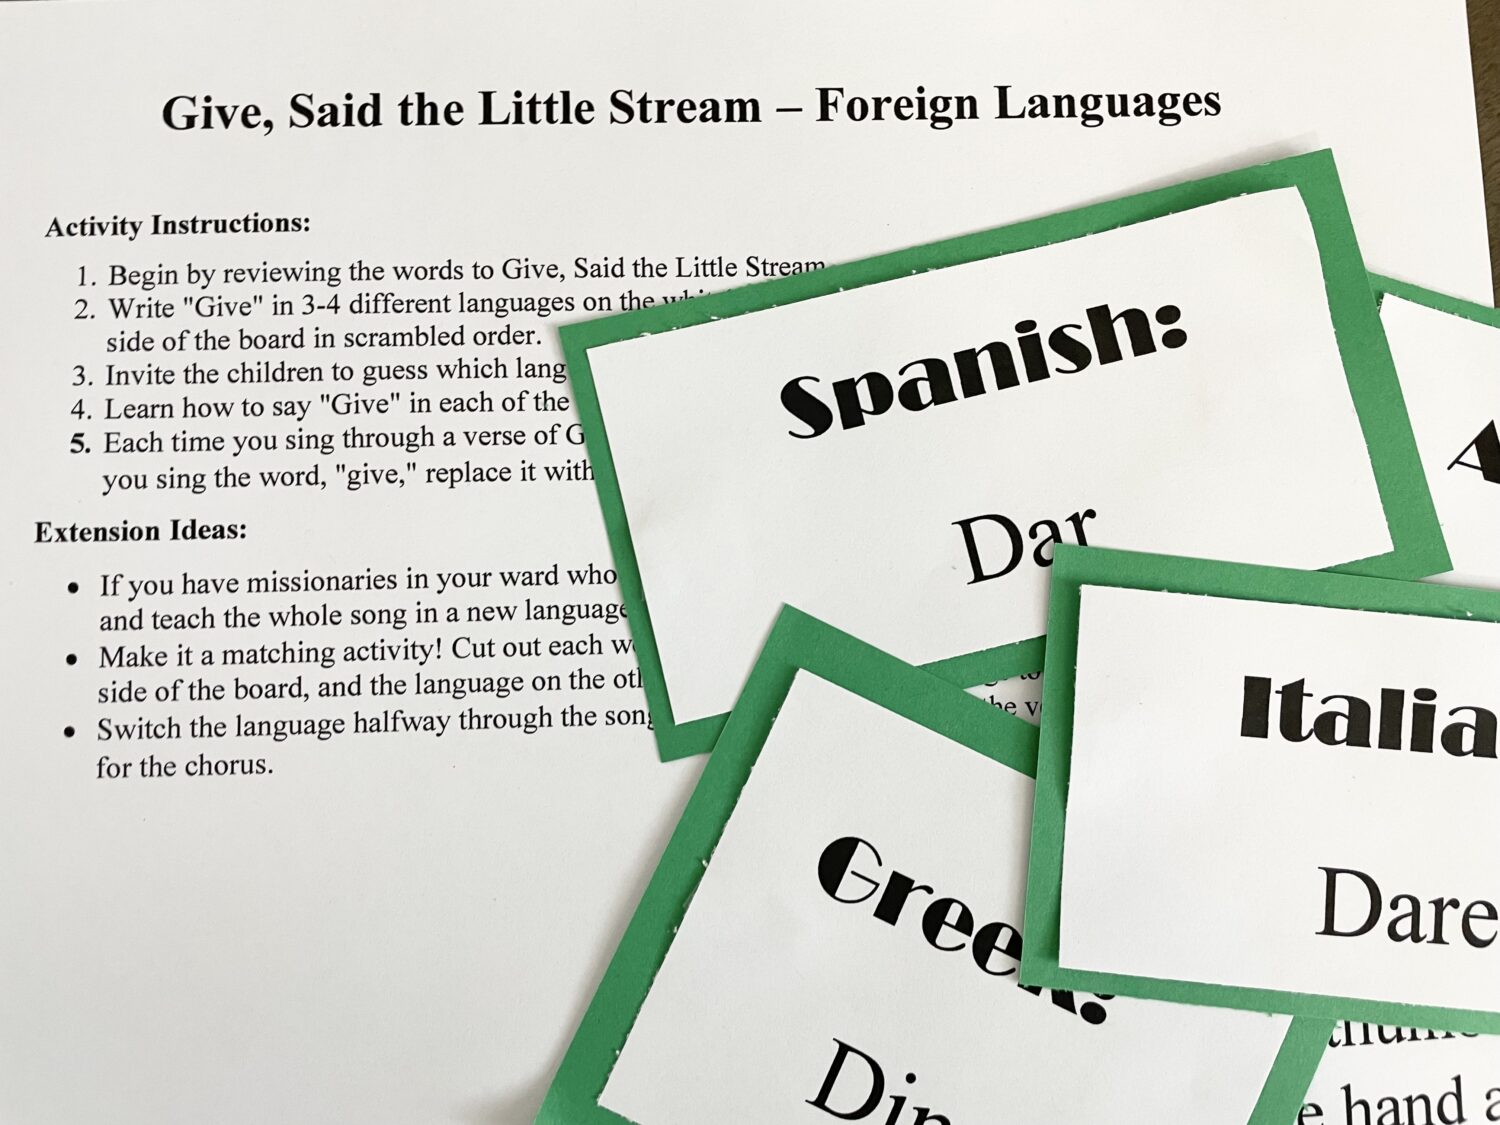 Give, Said the Little Stream Foreign Language Easy ideas for Music Leaders IMG 6179 e1647123561647